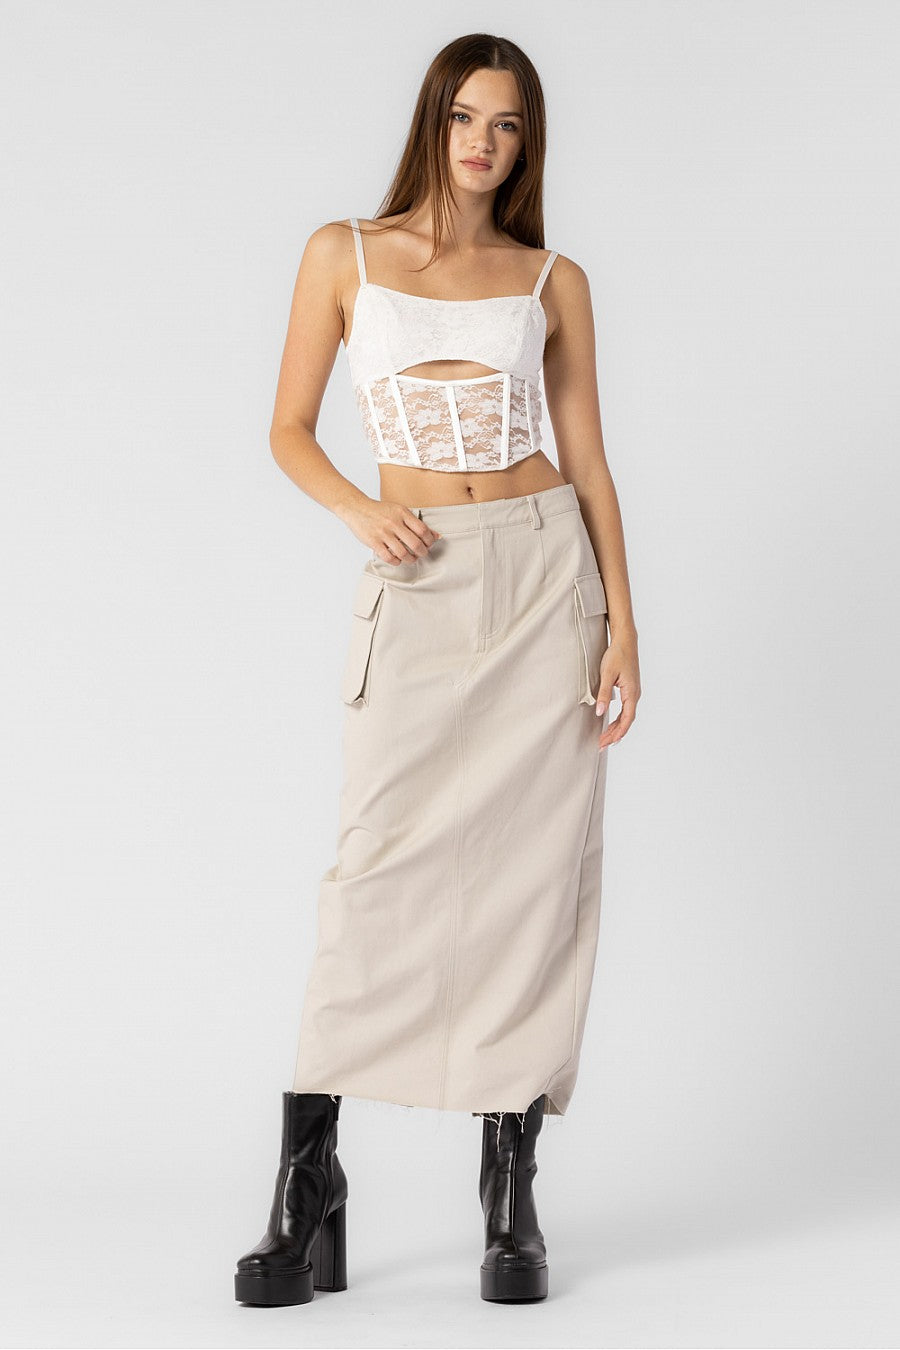 Model is wearing a maxi cargo skirt with side pockets.